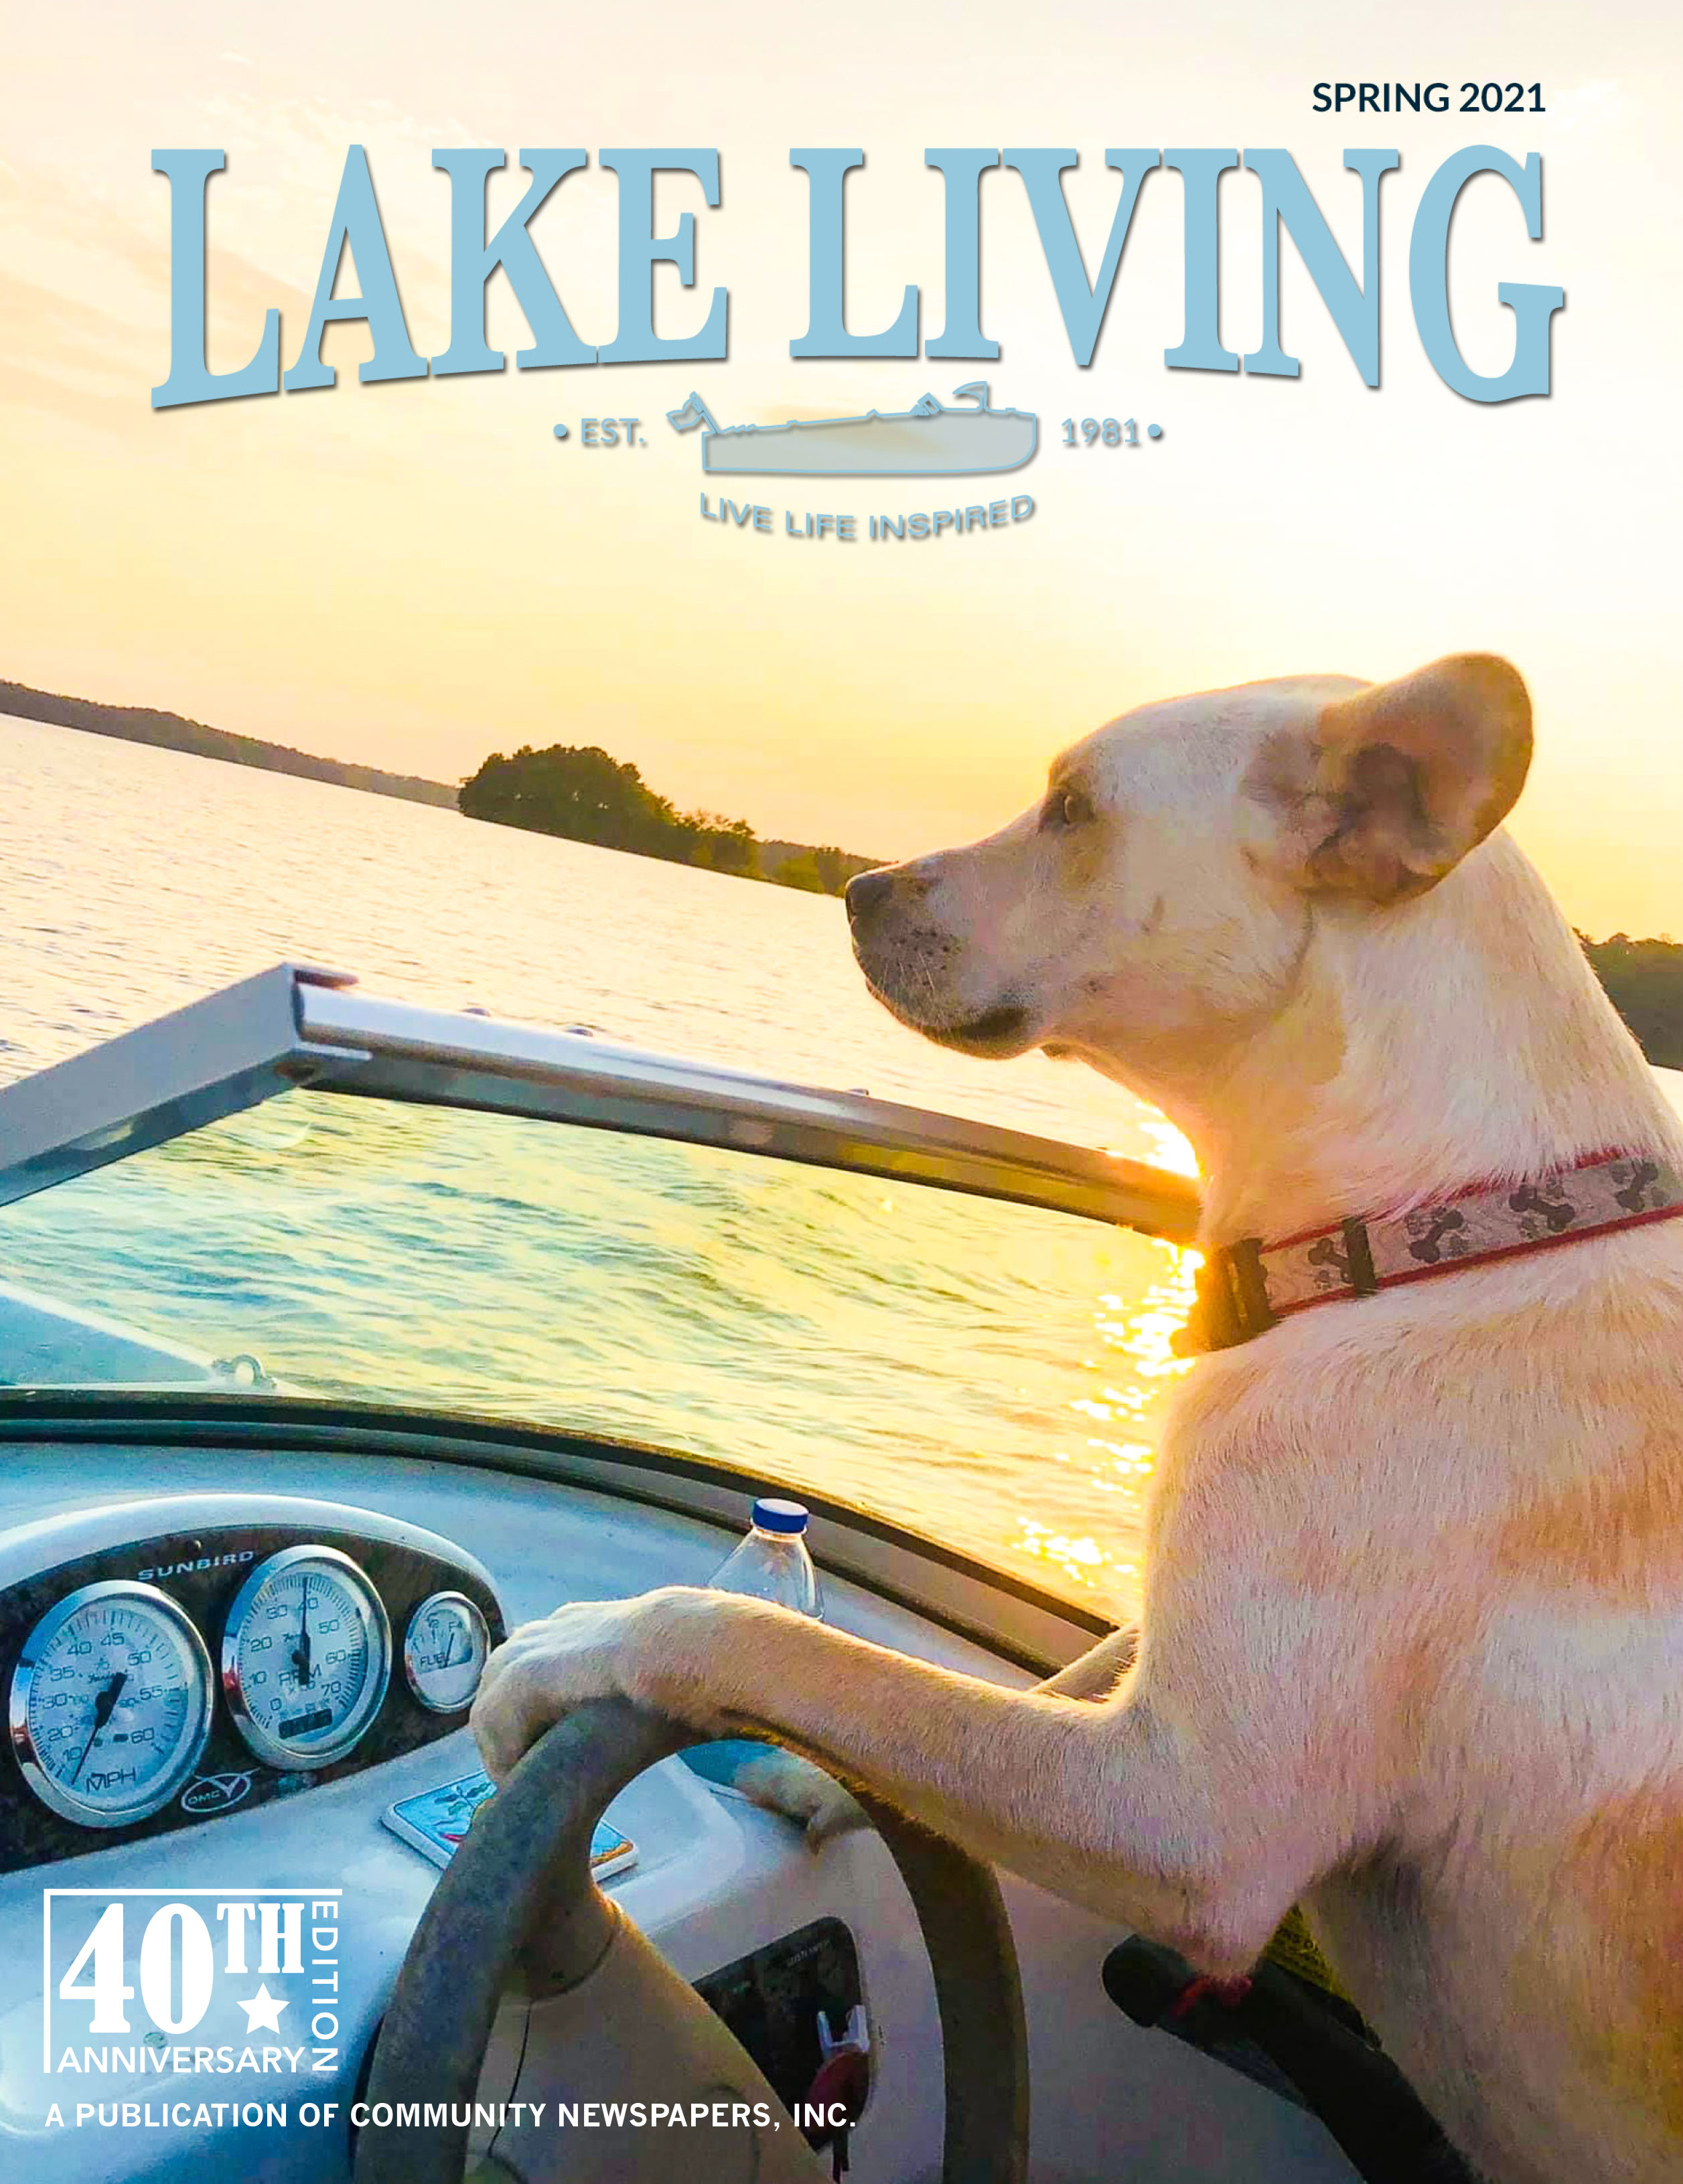 Do you have a great photo of summertime on the lake? Have you caught a fabulous fish on an area lake? Lake Living magazine is now accepting submissions for photography that could be featured on the cover of the magazine’s summer 2021 edition.